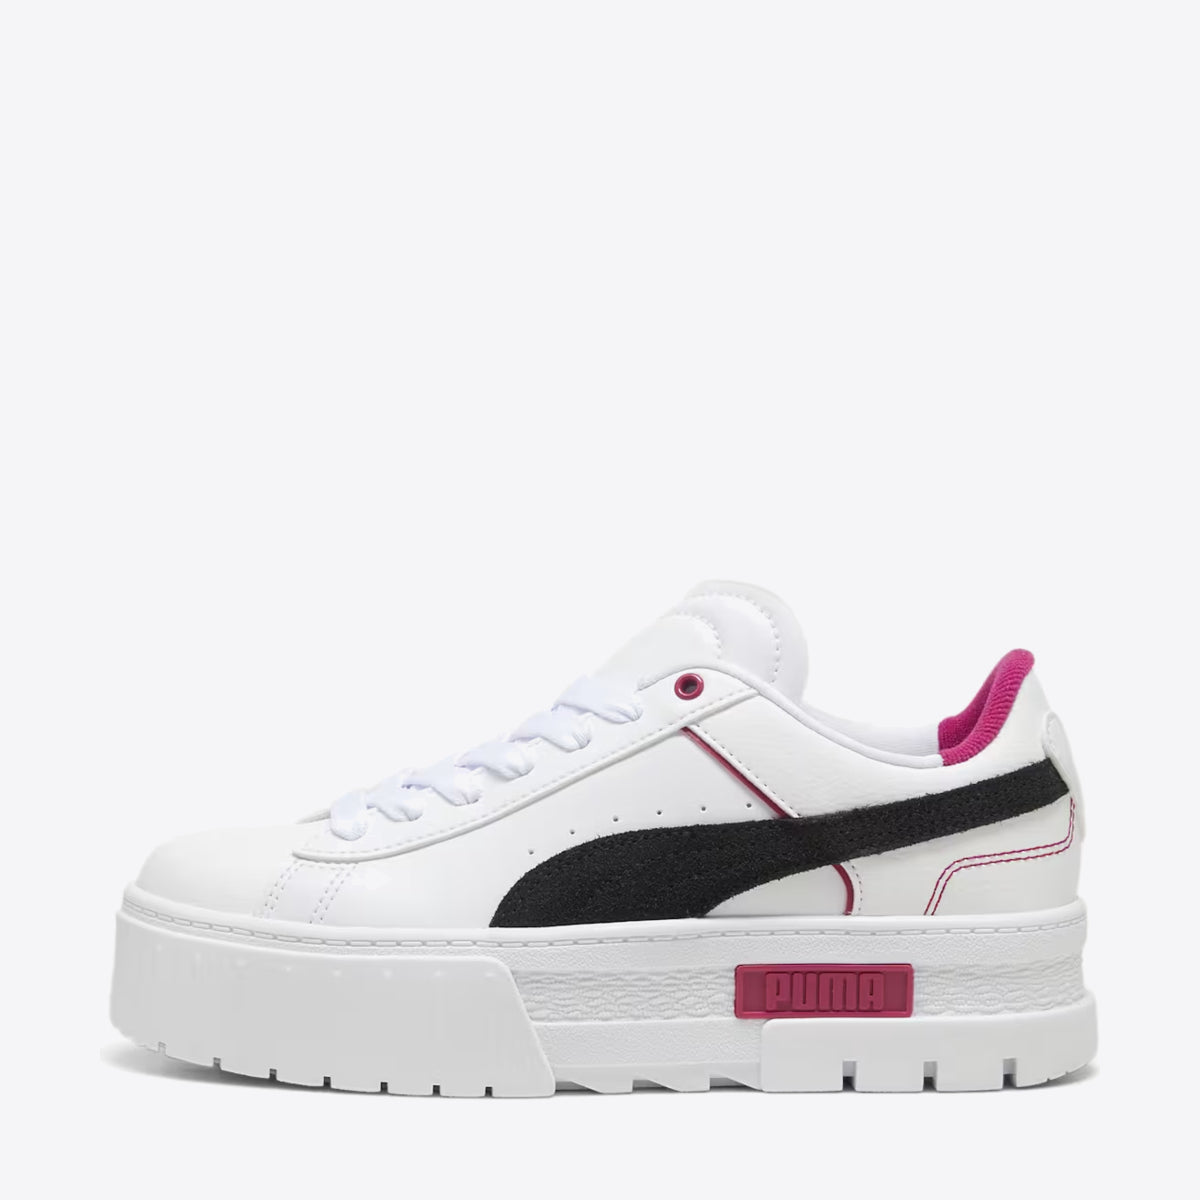 PUMA Mayze Queen of Hearts White/Black/Pink - Image 4